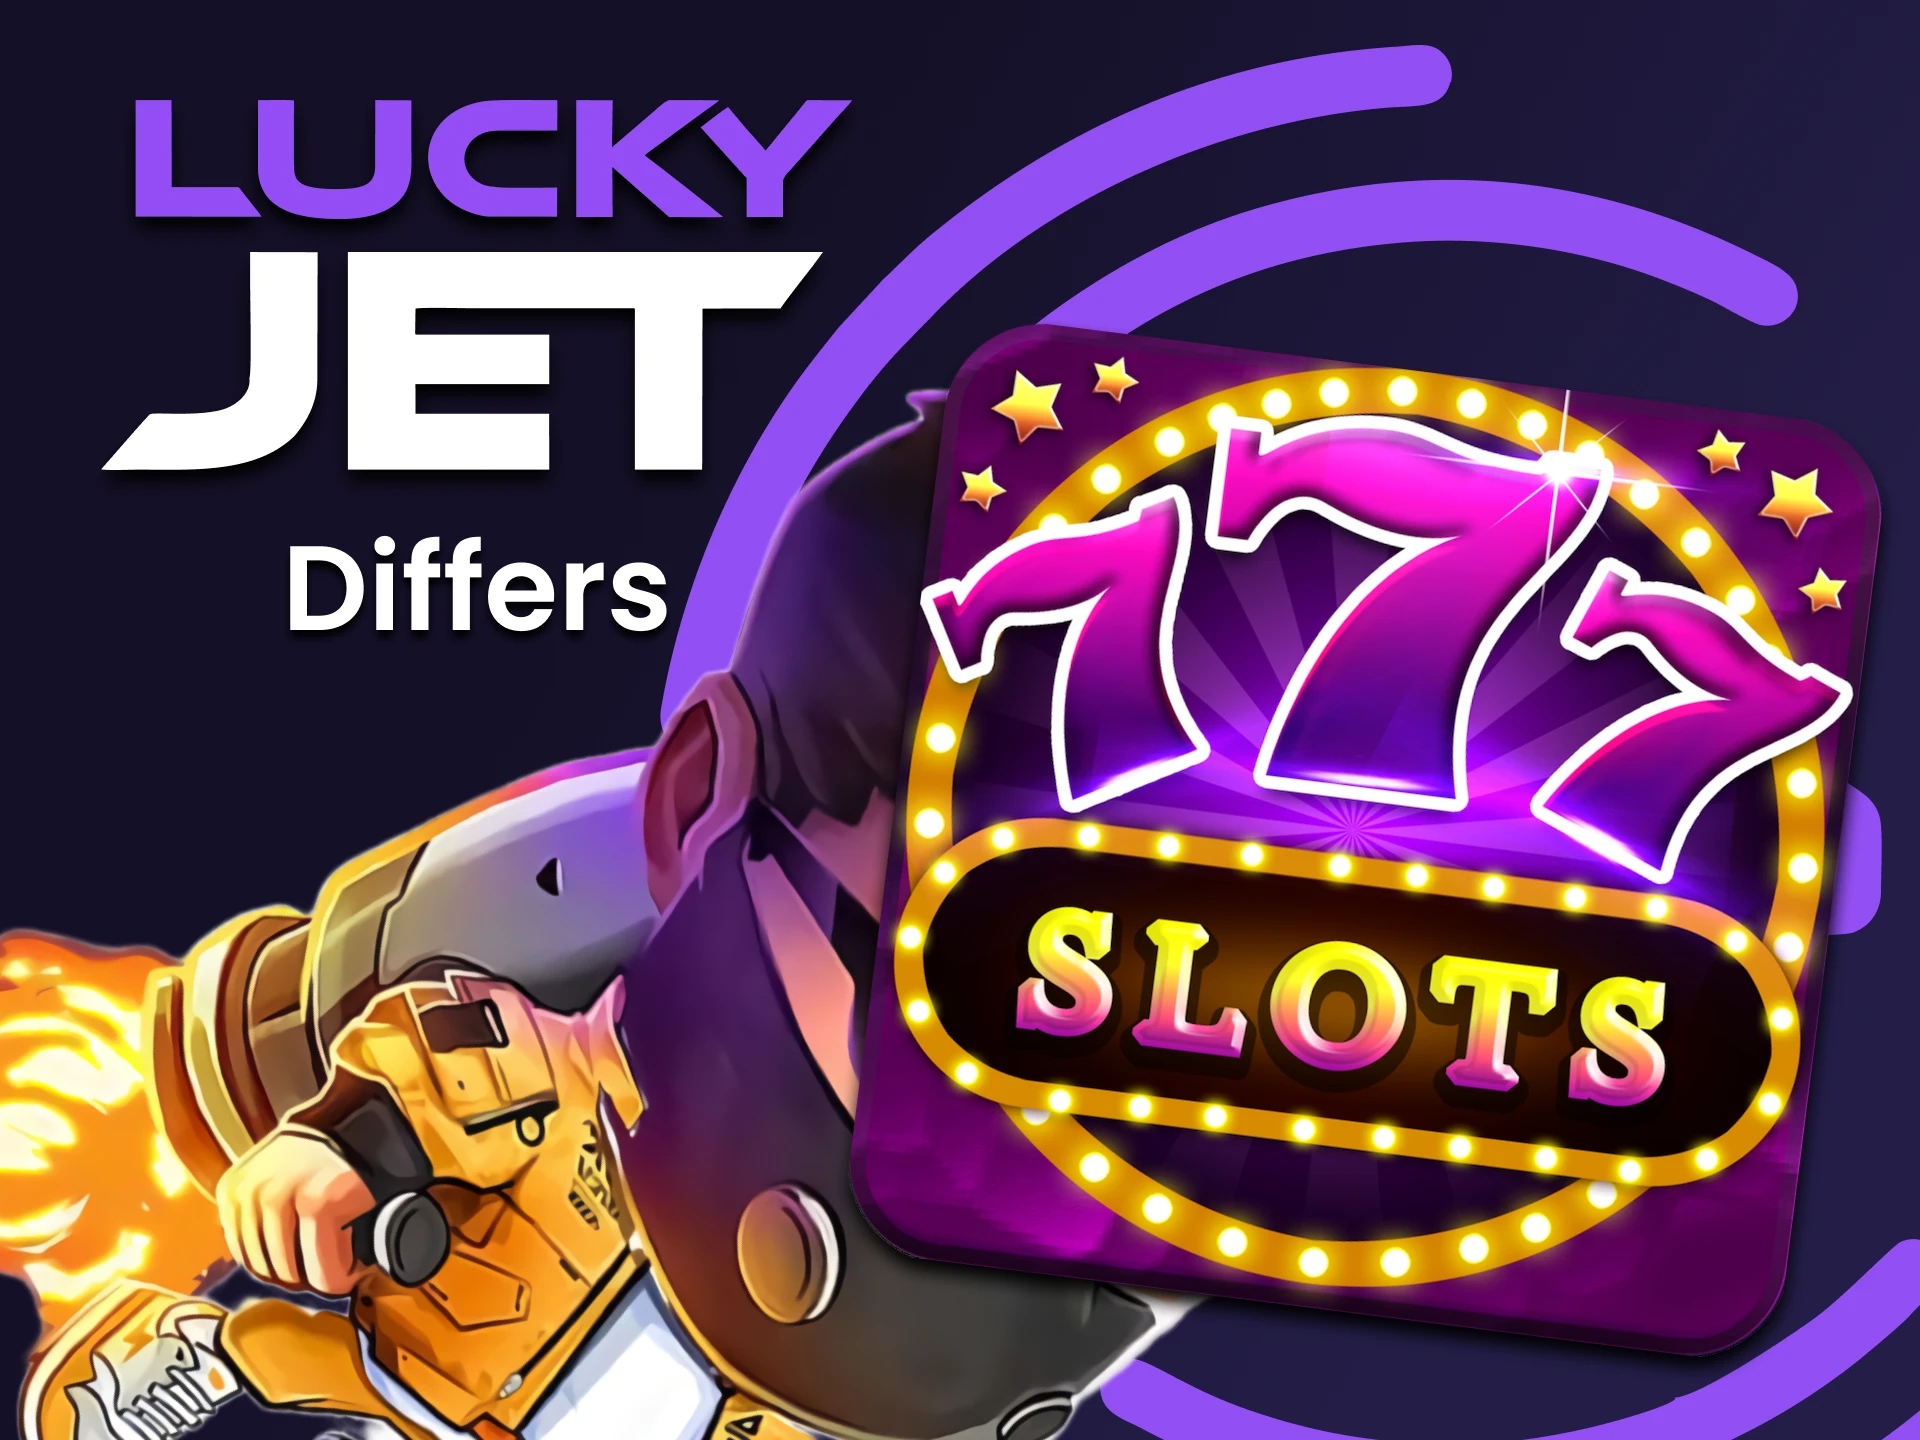 Find out the differences between Slots and Lucky Jet games.